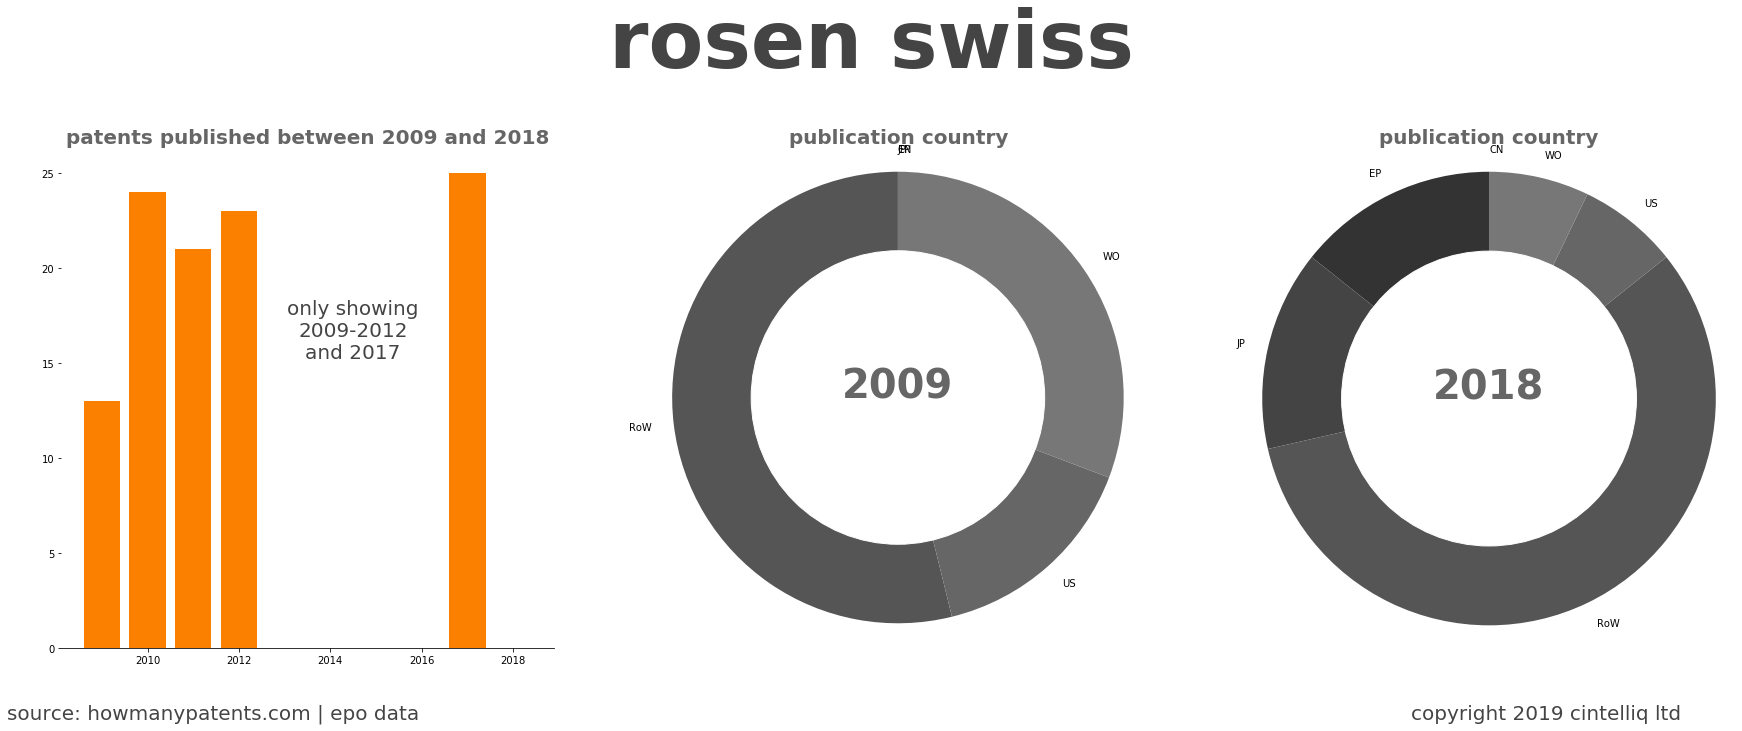 summary of patents for Rosen Swiss